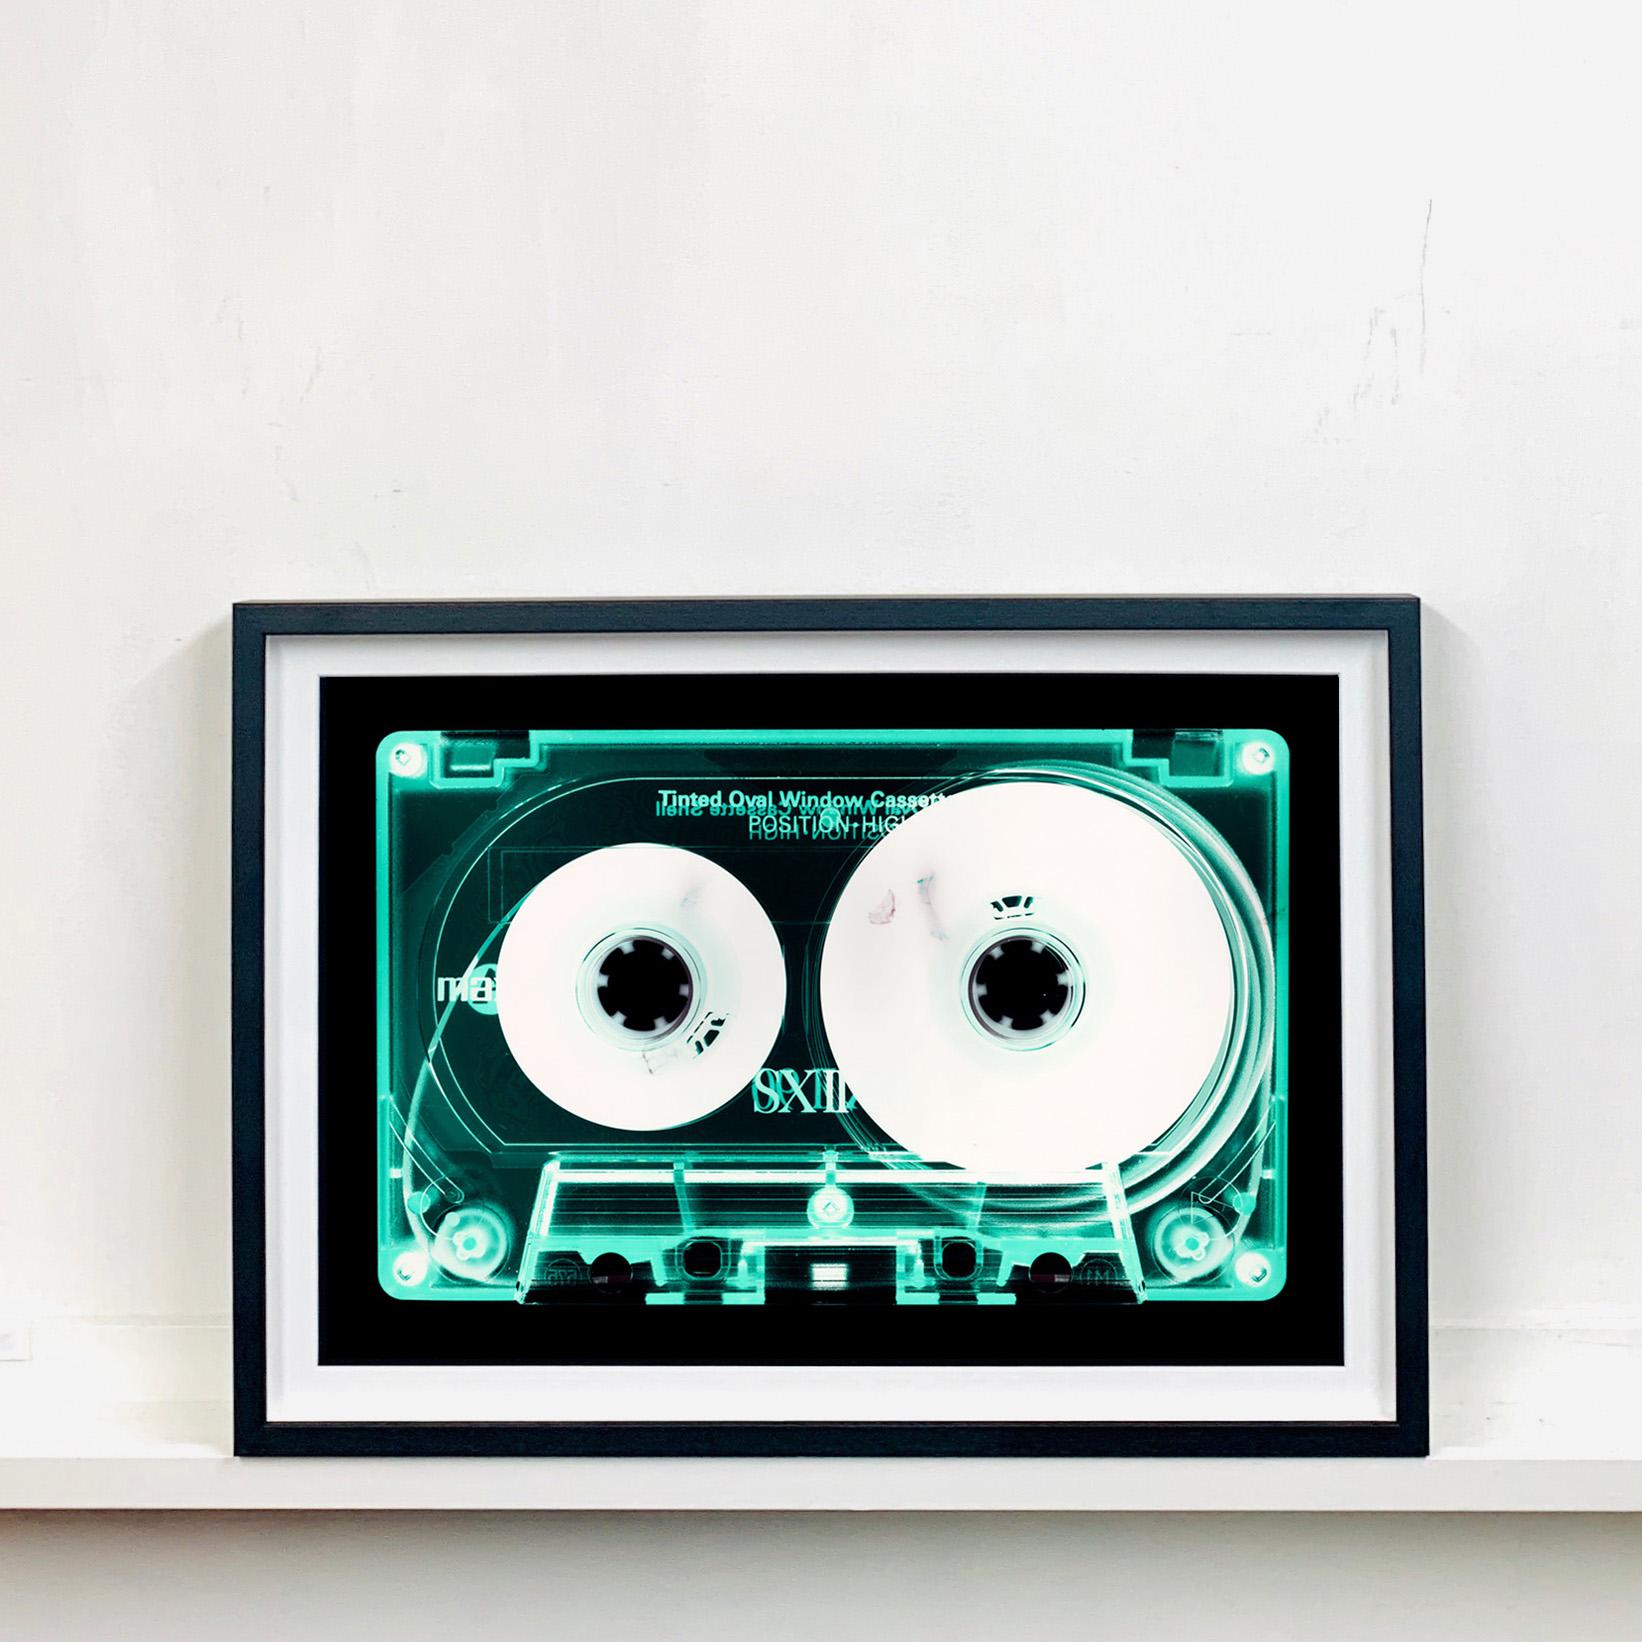 Tape Collection - Mint Tinted Cassette - Conceptual Color Music Pop Art - Print by Heidler & Heeps